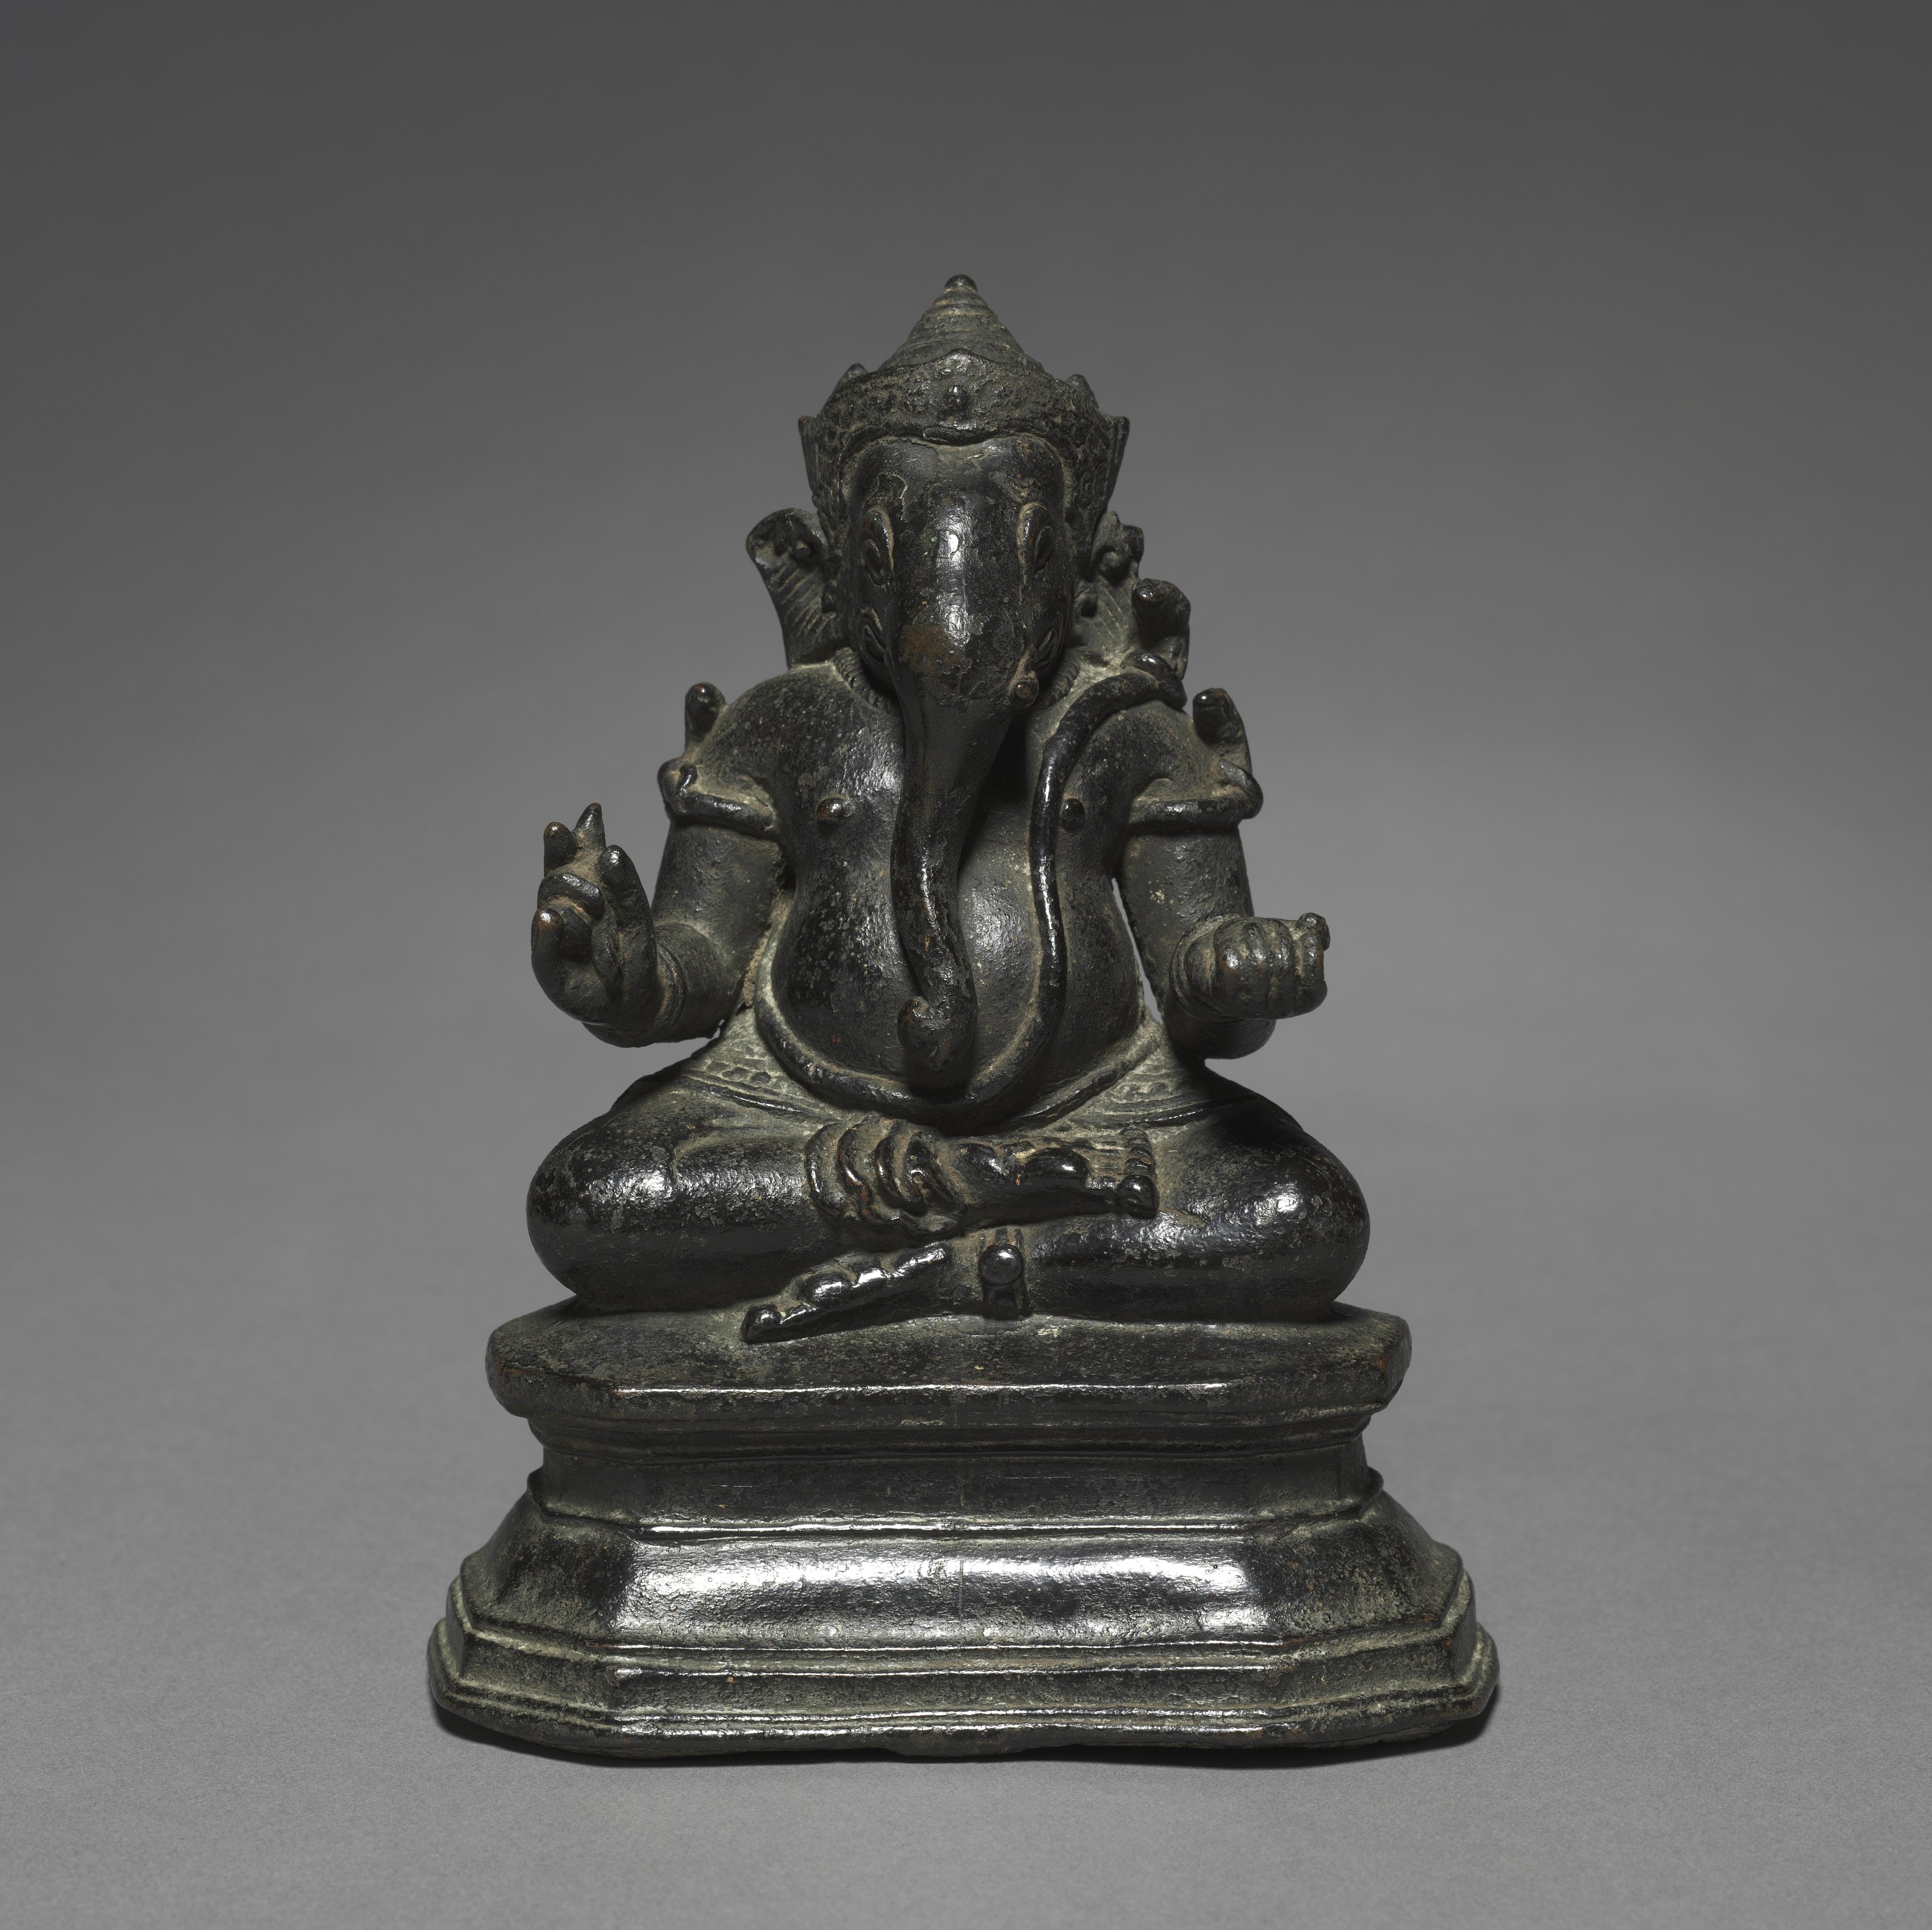 Seated Two-armed Ganesa